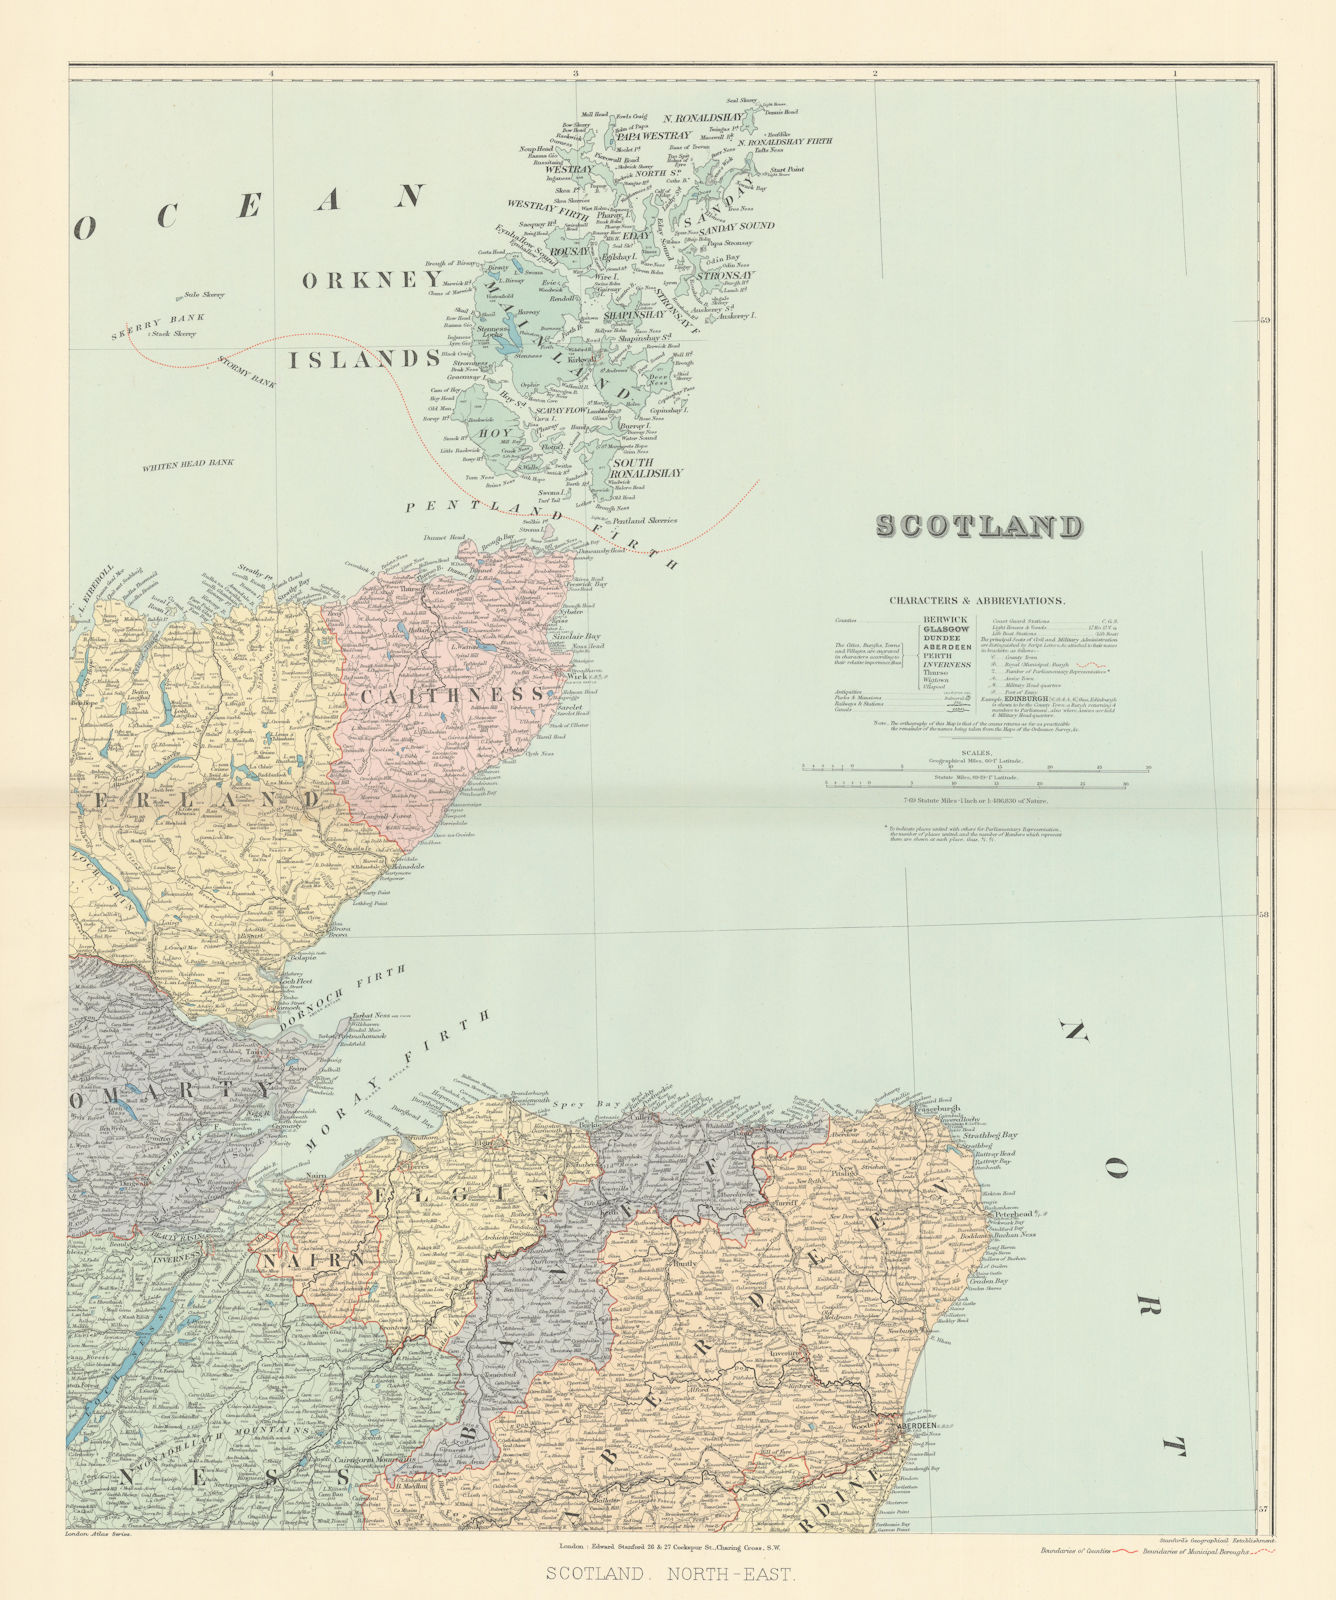 Scotland N.E. Orkney Cathiness Banff Elgin Aberdeen Sutherland STANFORD 1896 map